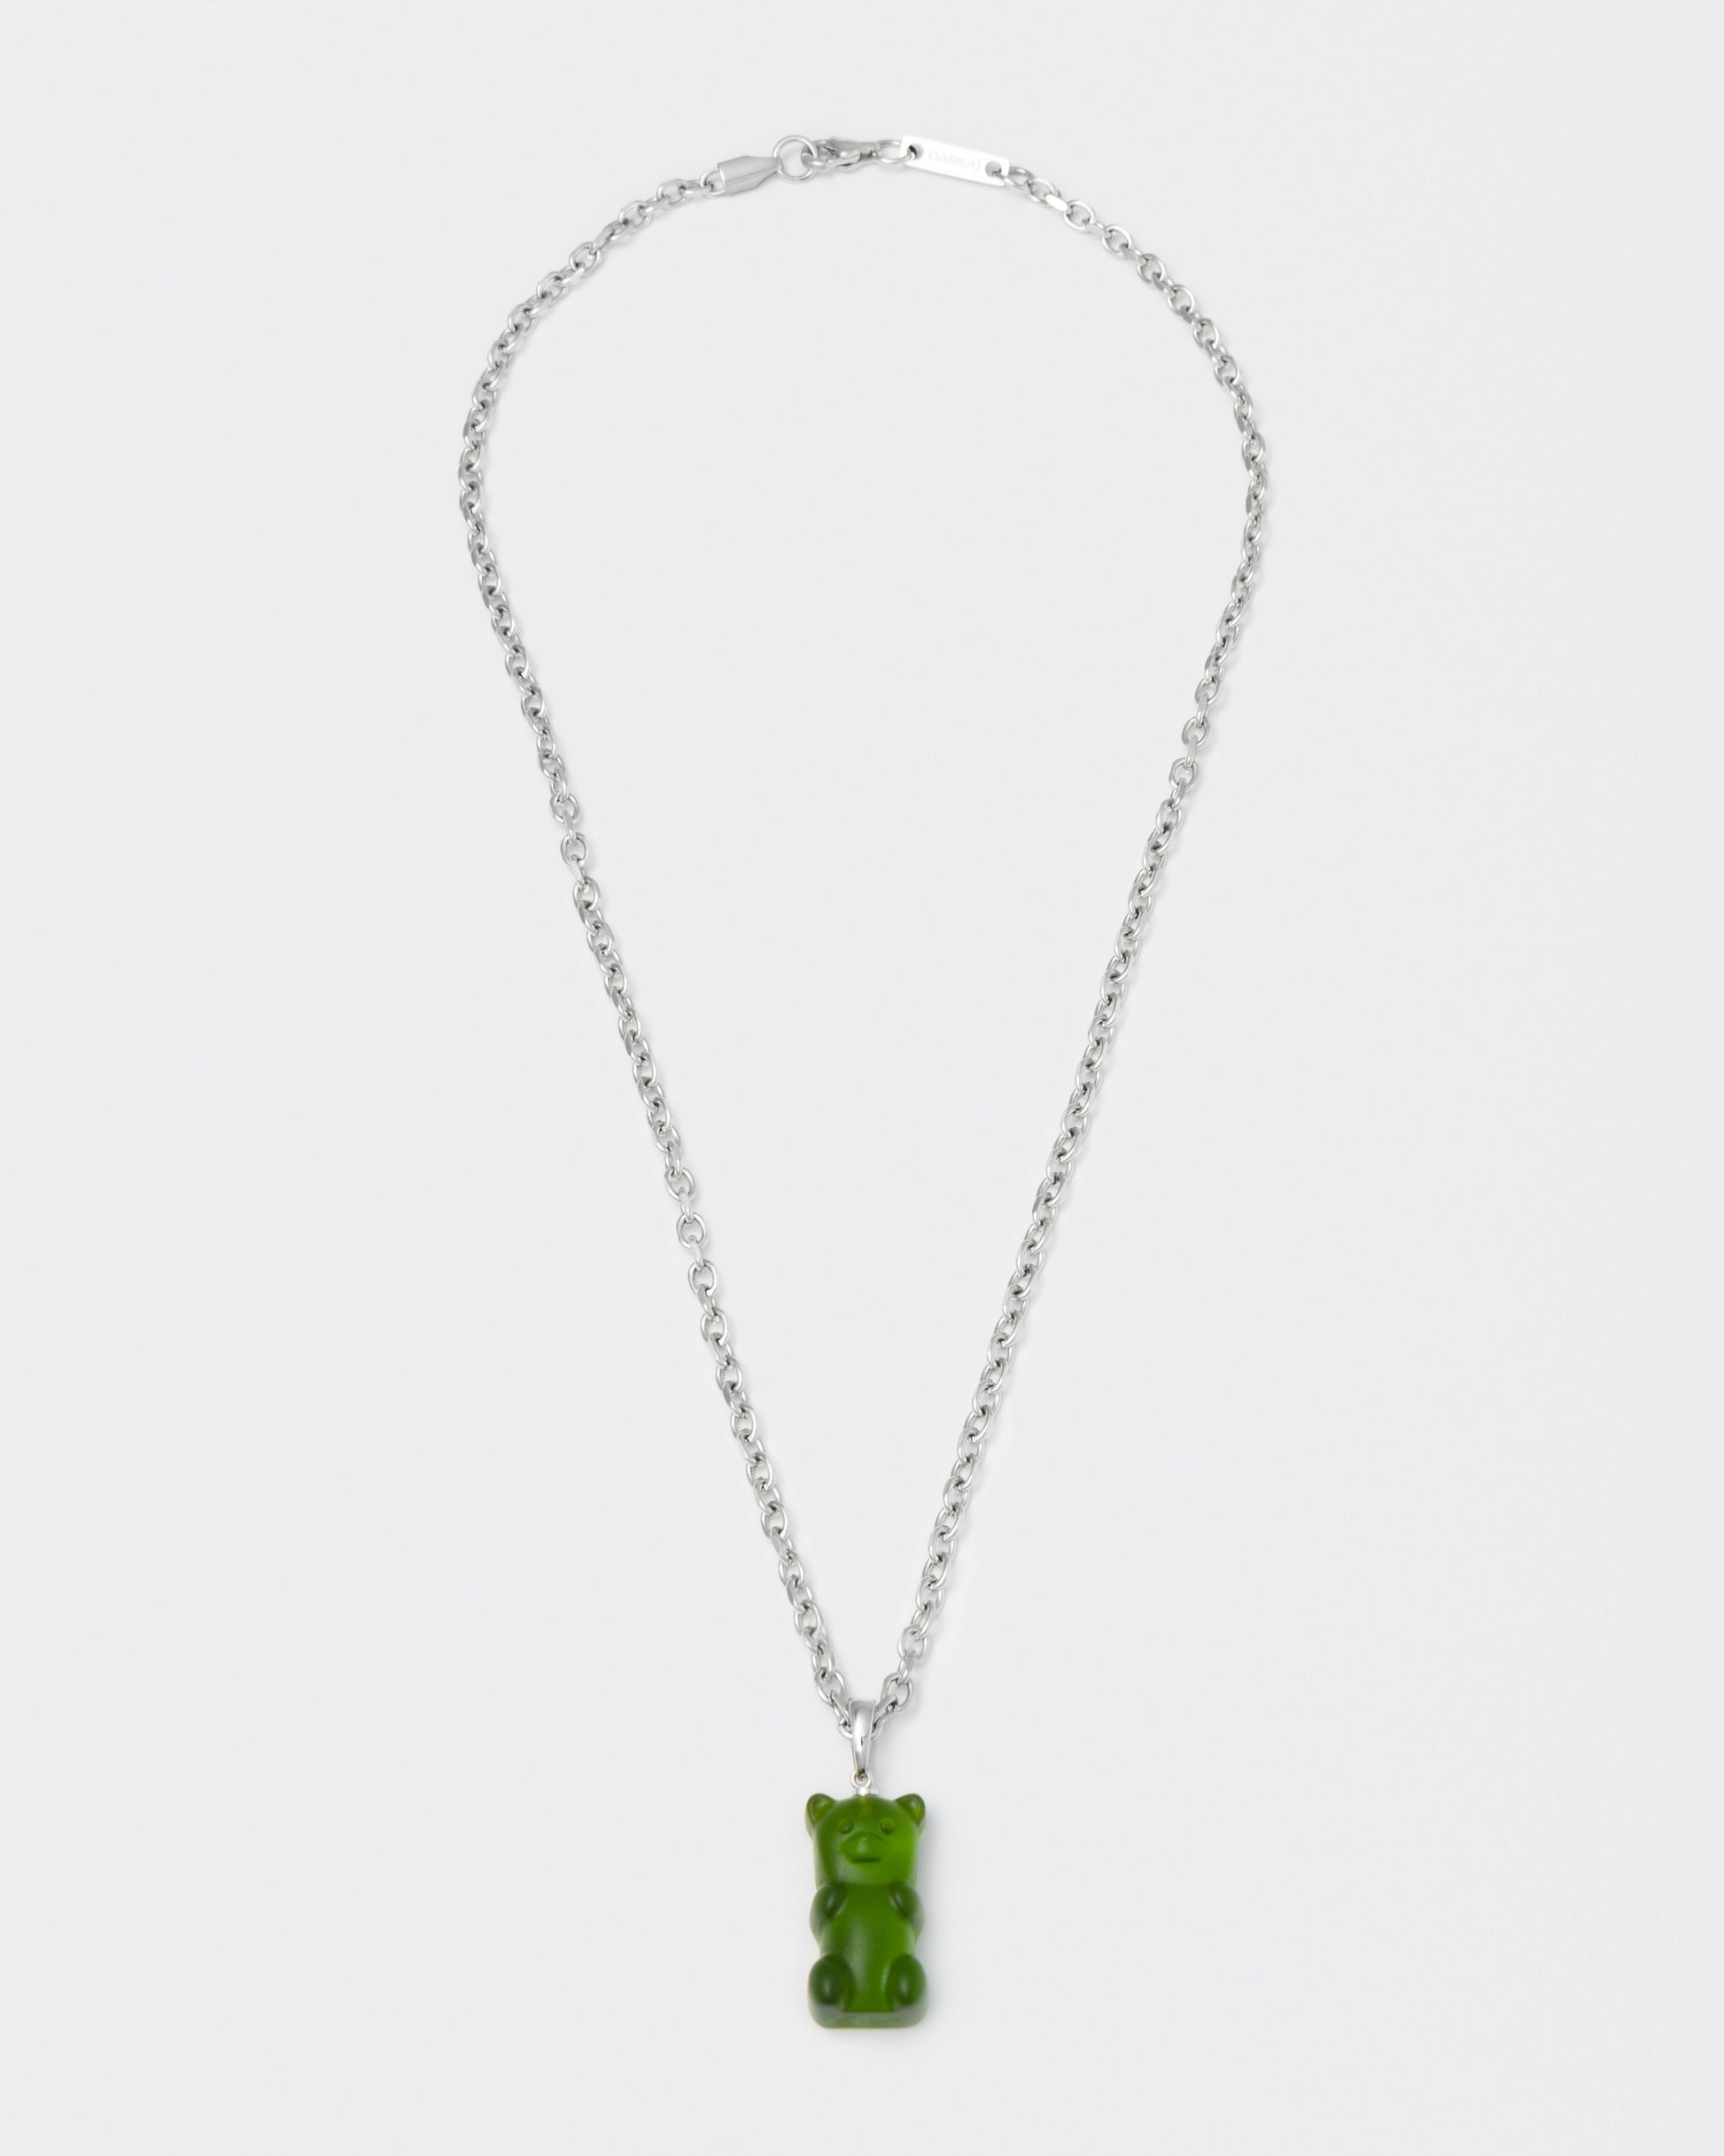 8k white gold coated gummy bear pendant necklace with 3D cut sandblasted crystal in green and 3mm rolo chain